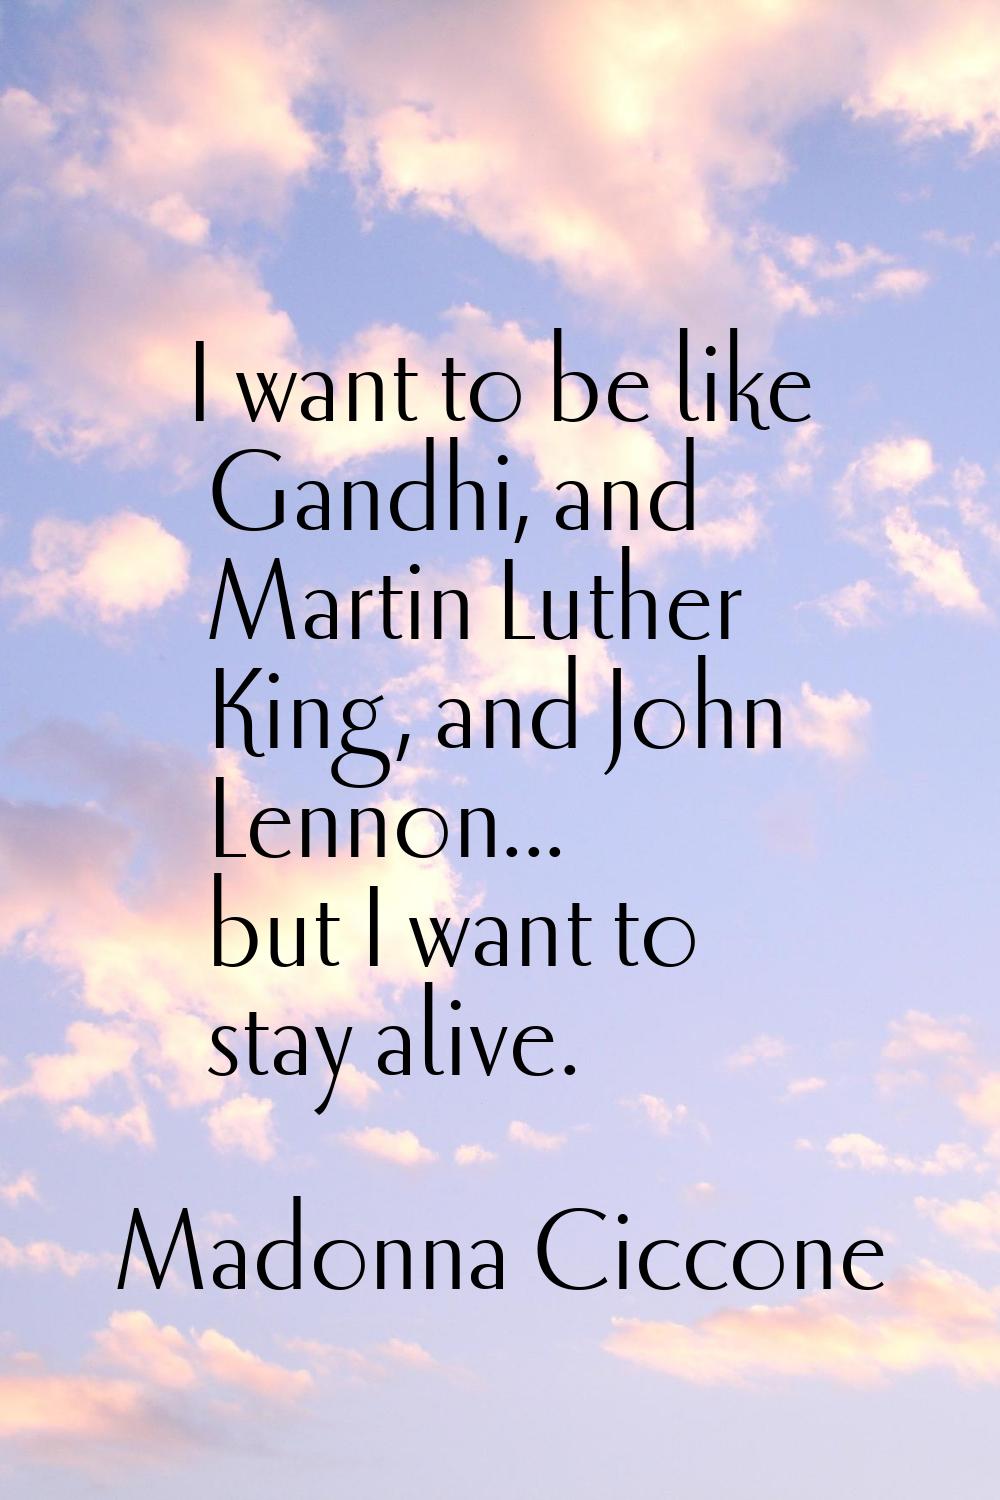 I want to be like Gandhi, and Martin Luther King, and John Lennon... but I want to stay alive.